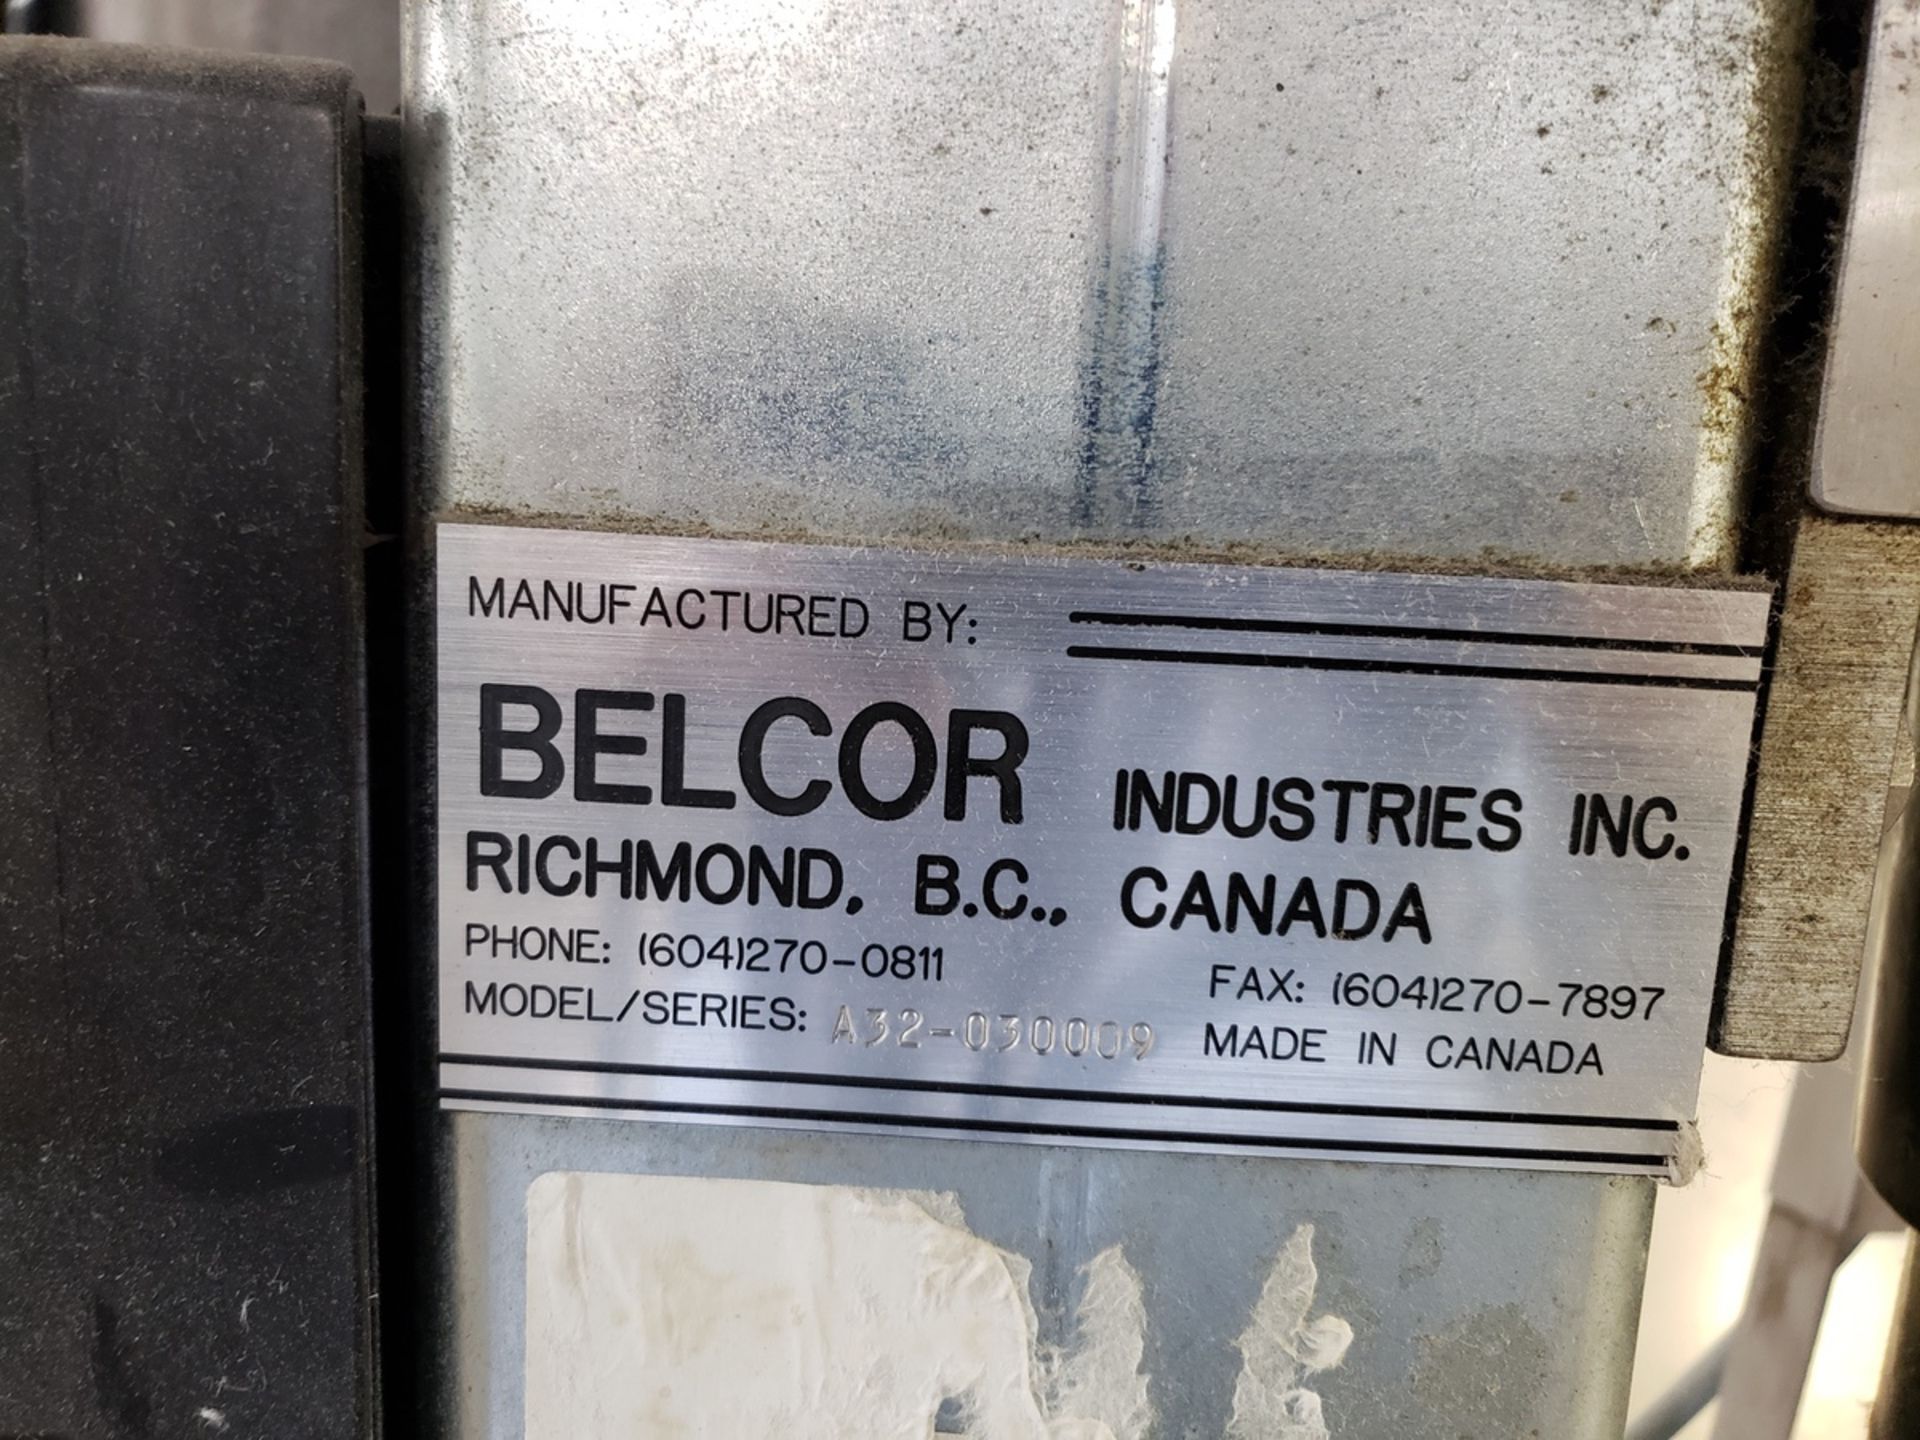 Belcor Model A32 36"D Rotary Accumulation Table, S/N A32-030009, Asset #13, (200 | Rig Fee: $50 - Image 2 of 2